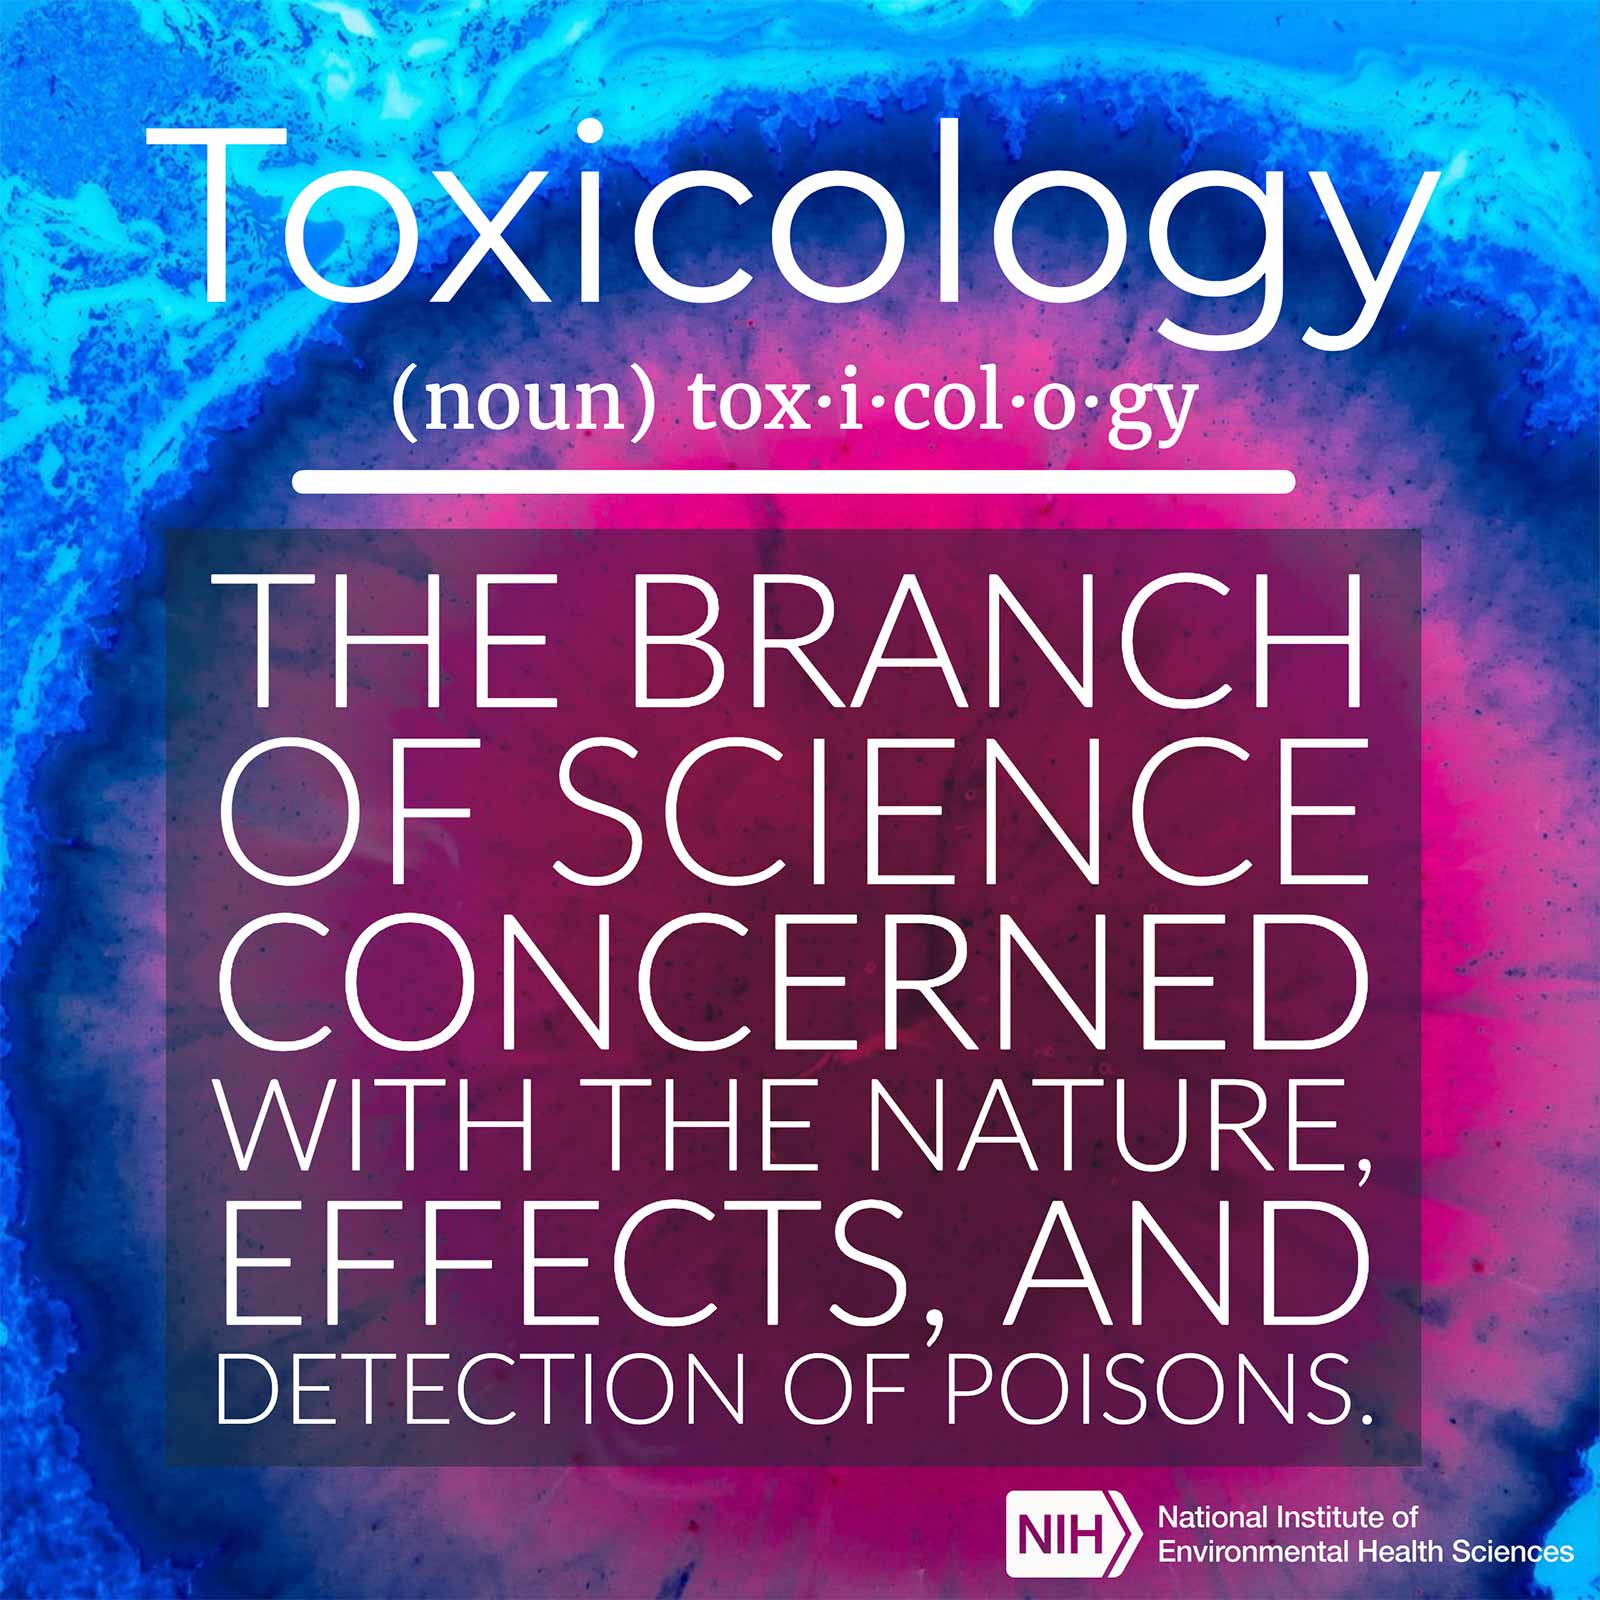 Toxicology (noun) defined as &#39;the branch of science concerned with the nature, effects, and detection of poisons.&#39;